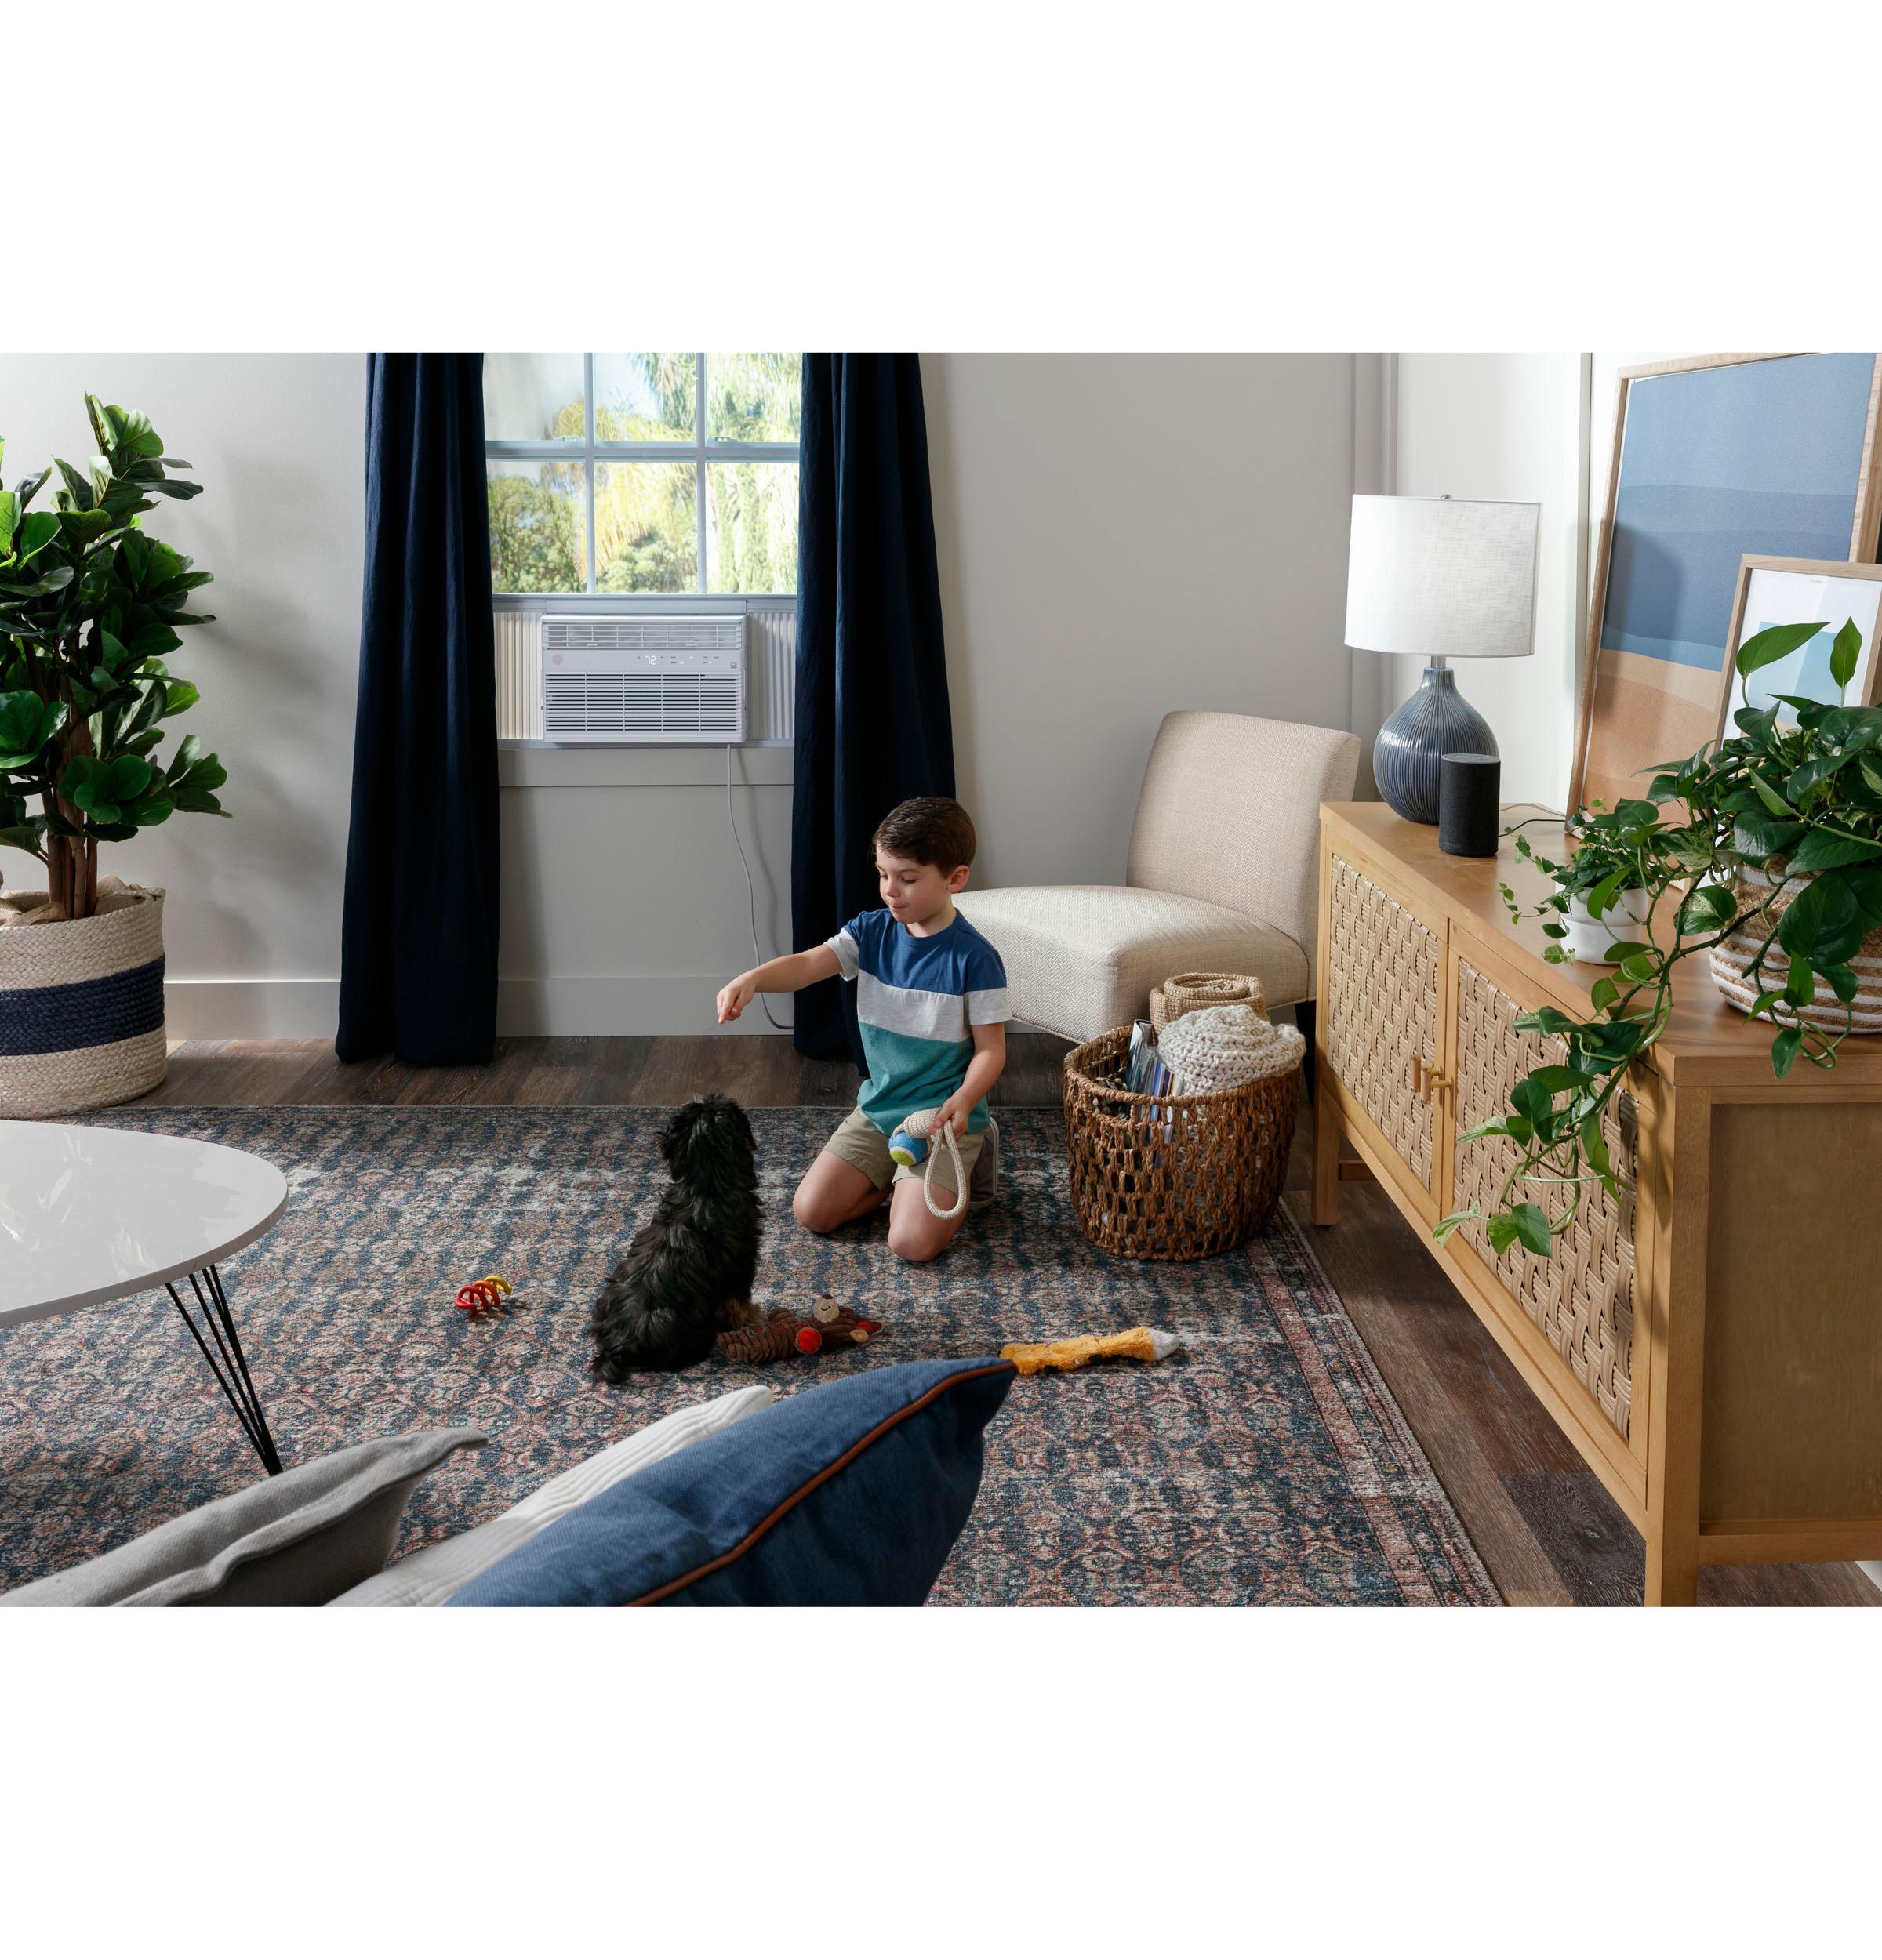 GE® 23,500 BTU Heat/Cool Electronic Window Air Conditioner for Extra-Large Rooms up to 1,500 sq. ft.